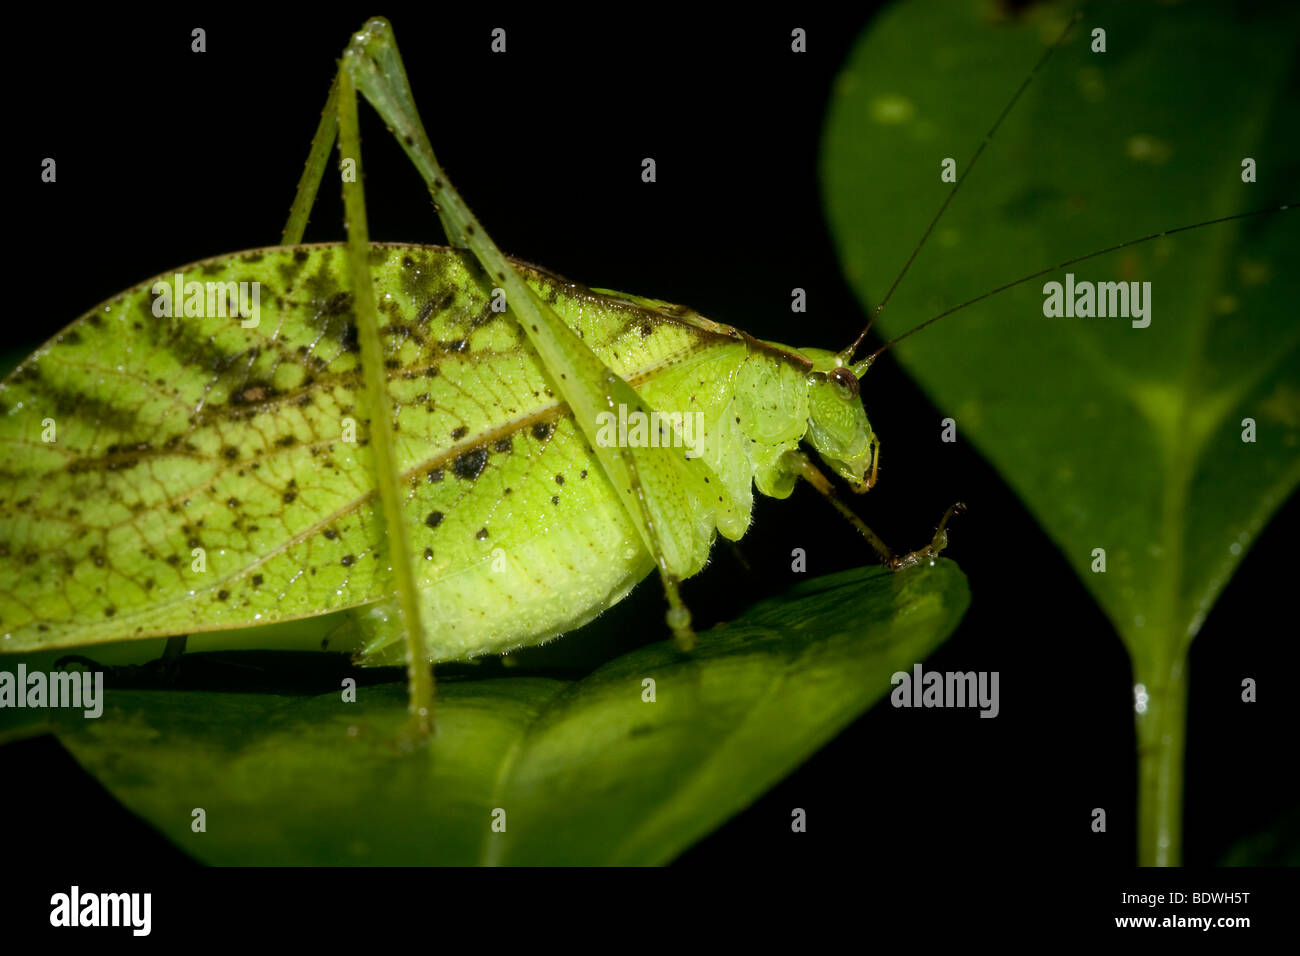 A well-camouflaged katydid, order Orthoptera, family Tettigoniidae. Photographed in the mountains of Costa Rica. Stock Photo